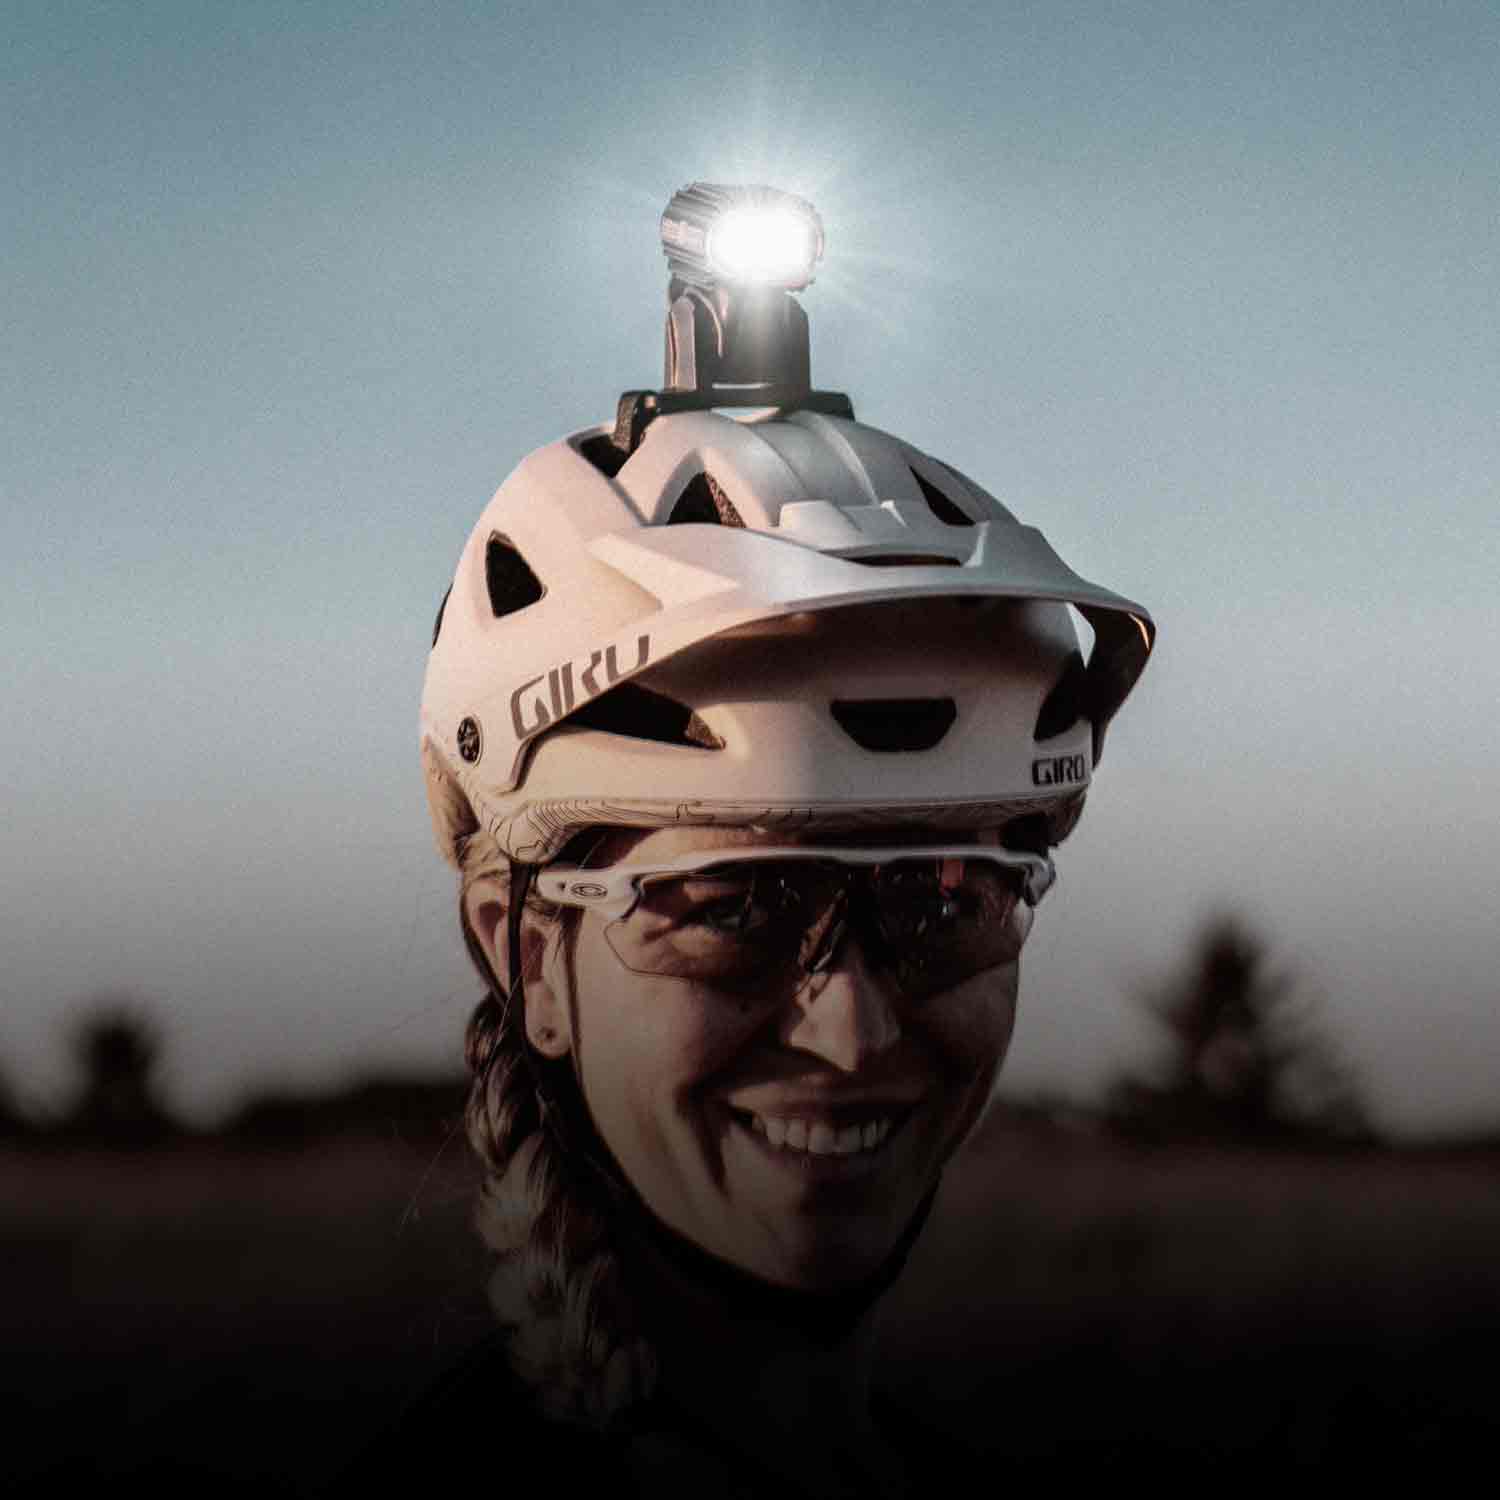 A woman's head wearing a helmet with a bright light attached to the top of it.